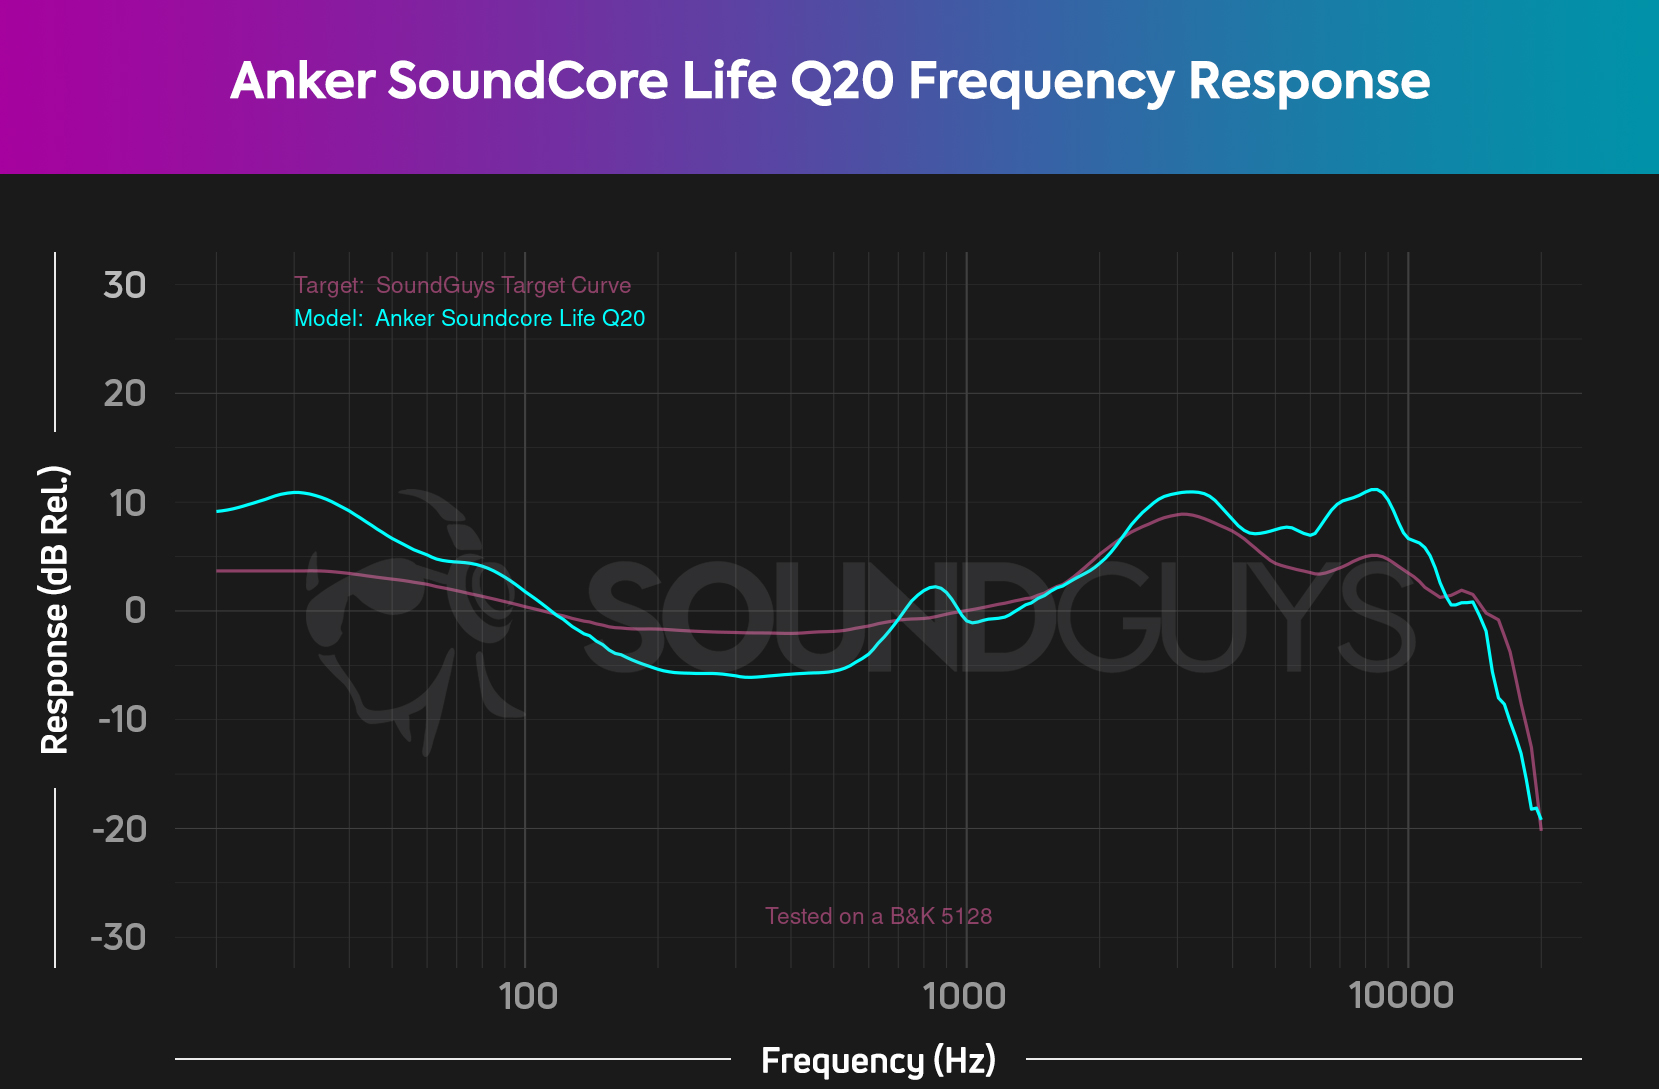 A chart depicts the frequency response for the Anker Soundcore Life Q20 which boosts bass notes much more than our target recommends.